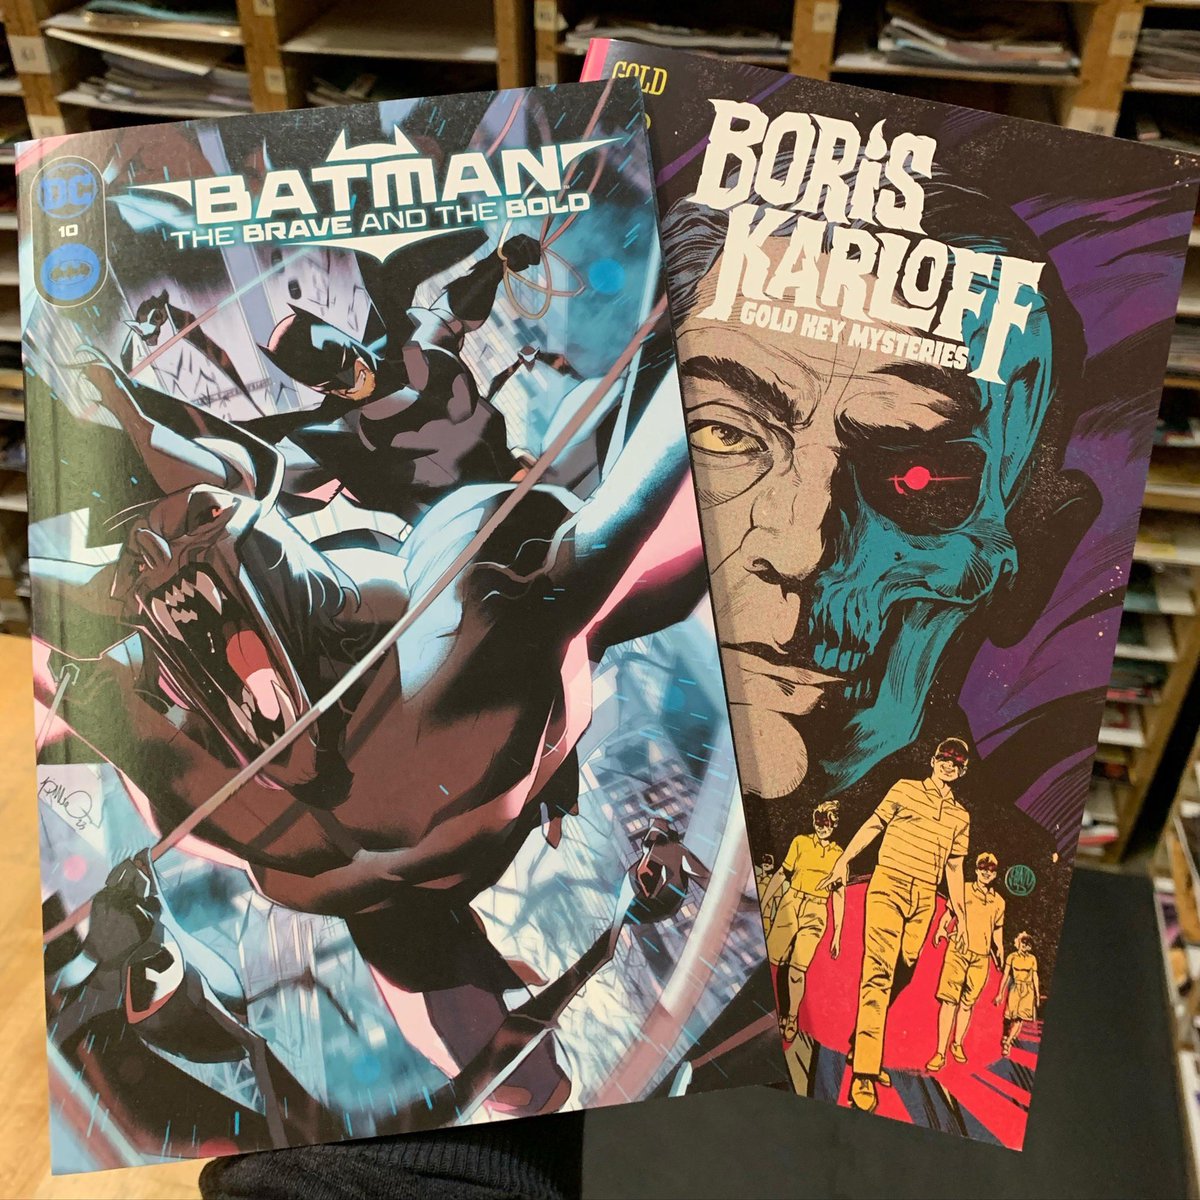 Just a quick reminder that we have @matthardingart coming in today, Wednesday, February 28th, to sign copies of his newest titles! Matt wrote a short story in each of these awesome issues! Come on by between 4 and 6pm to say hello! #mattharding #goldkeycomics #dccomics #instore